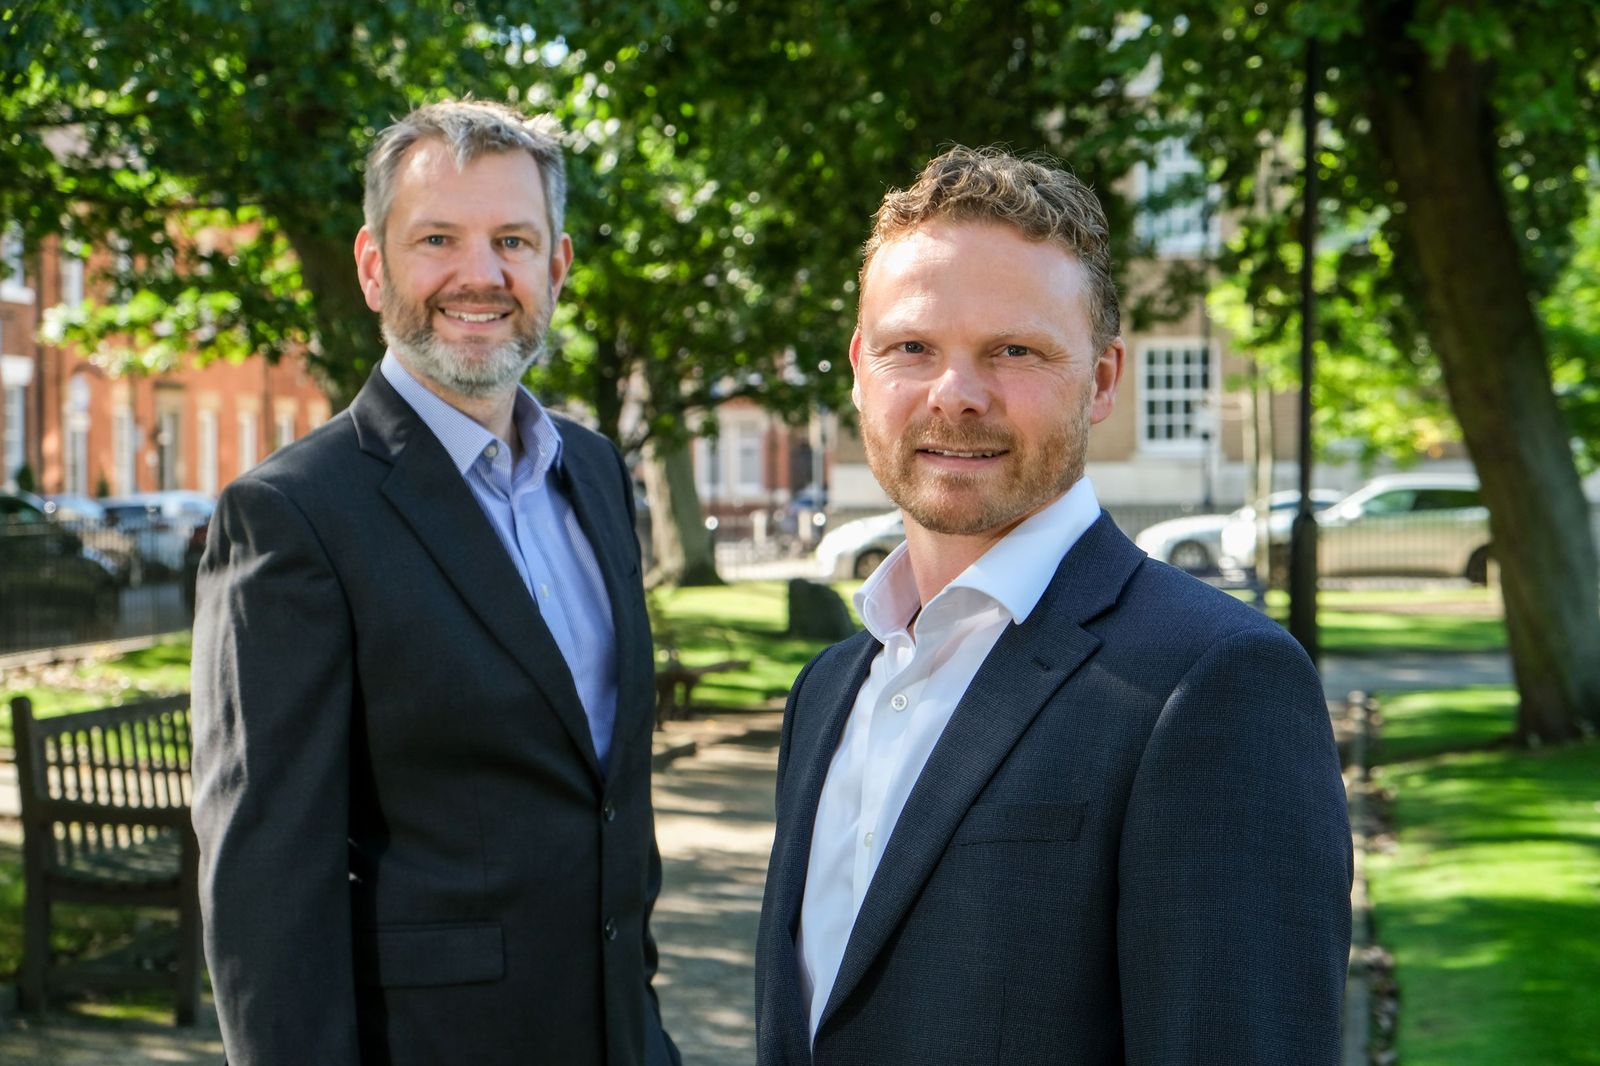 Energy specialist joins Clarion’s growing commercial and IT law team